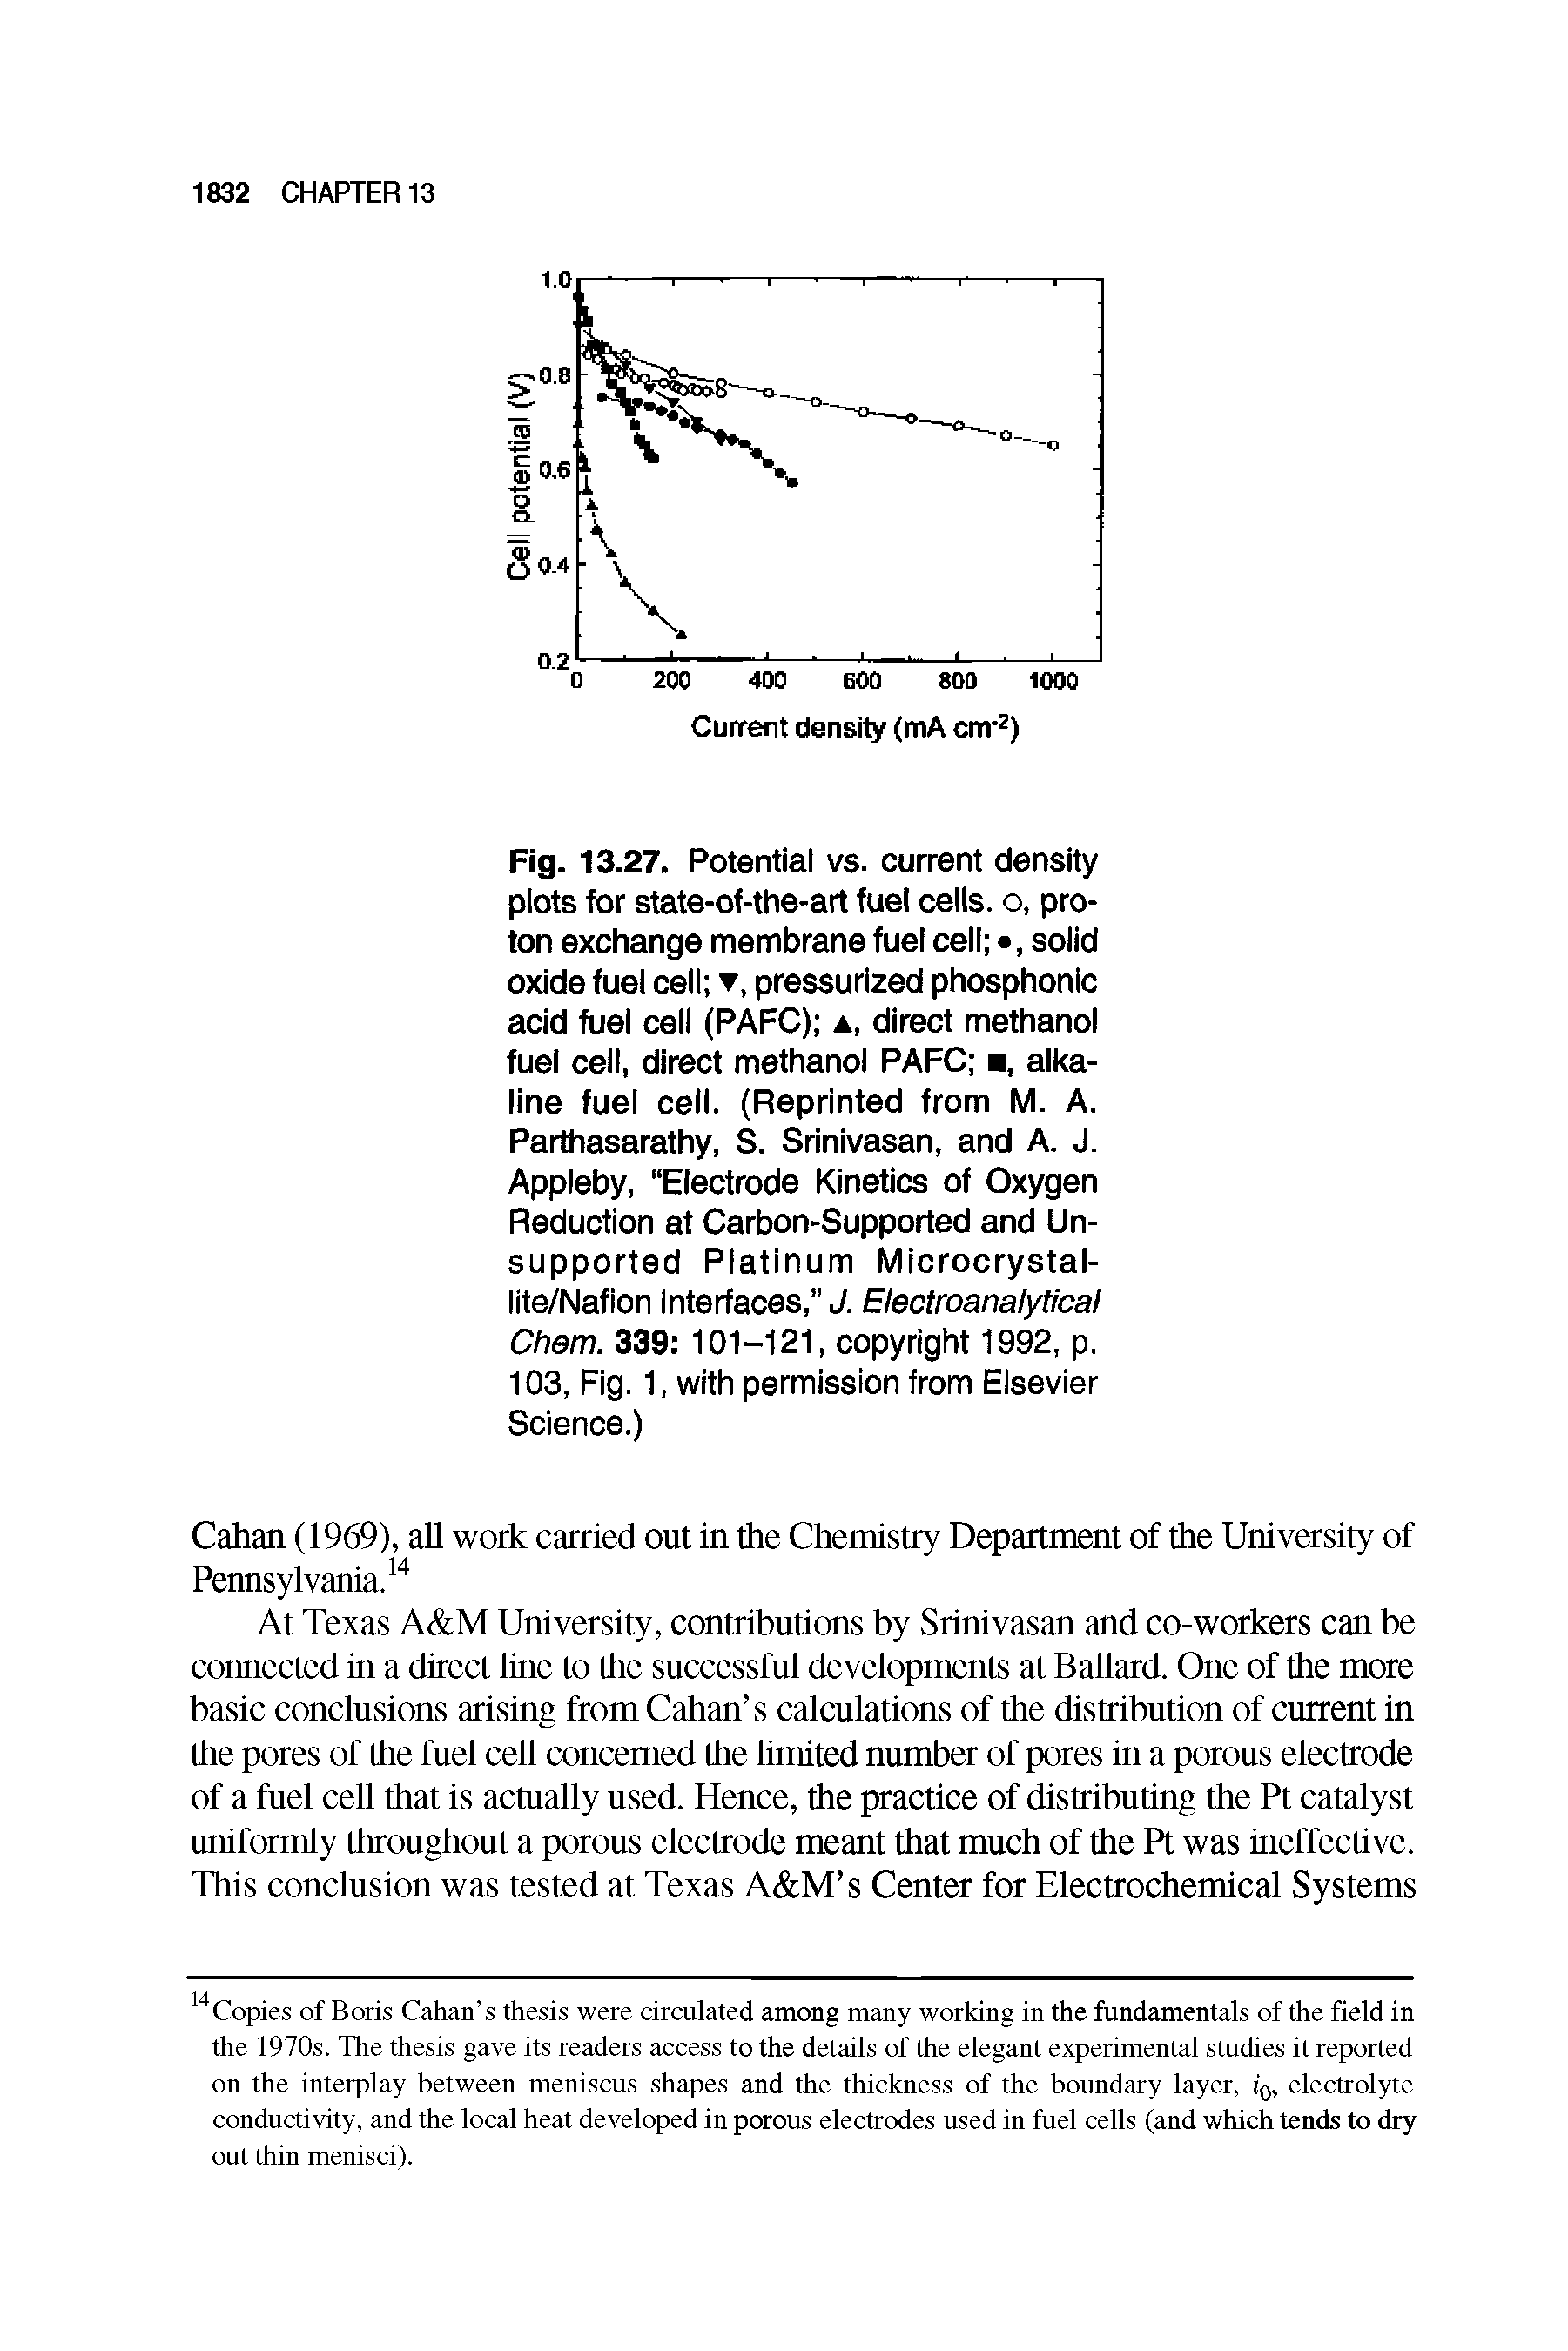 Fig. 13.27. Potential vs. current density plots for state-of-the-art fuel cells, o, proton exchange membrane fuel cell , solid oxide fuel cell , pressurized phosphonic acid fuel cell (PAFC) a, direct methanol fuel cell, direct methanol PAFC , alkaline fuel cell. (Reprinted from M. A. Parthasarathy, S. Srinivasan, and A. J. Appleby, Electrode Kinetics of Oxygen Reduction at Carbon-Supported and Un-supported Platinum Microcrystal-lite/Nafion Interfaces, J. Electroanalytical Chem. 339 101-121, copyright 1992, p. 103, Fig. 1, with permission from Elsevier Science.)...